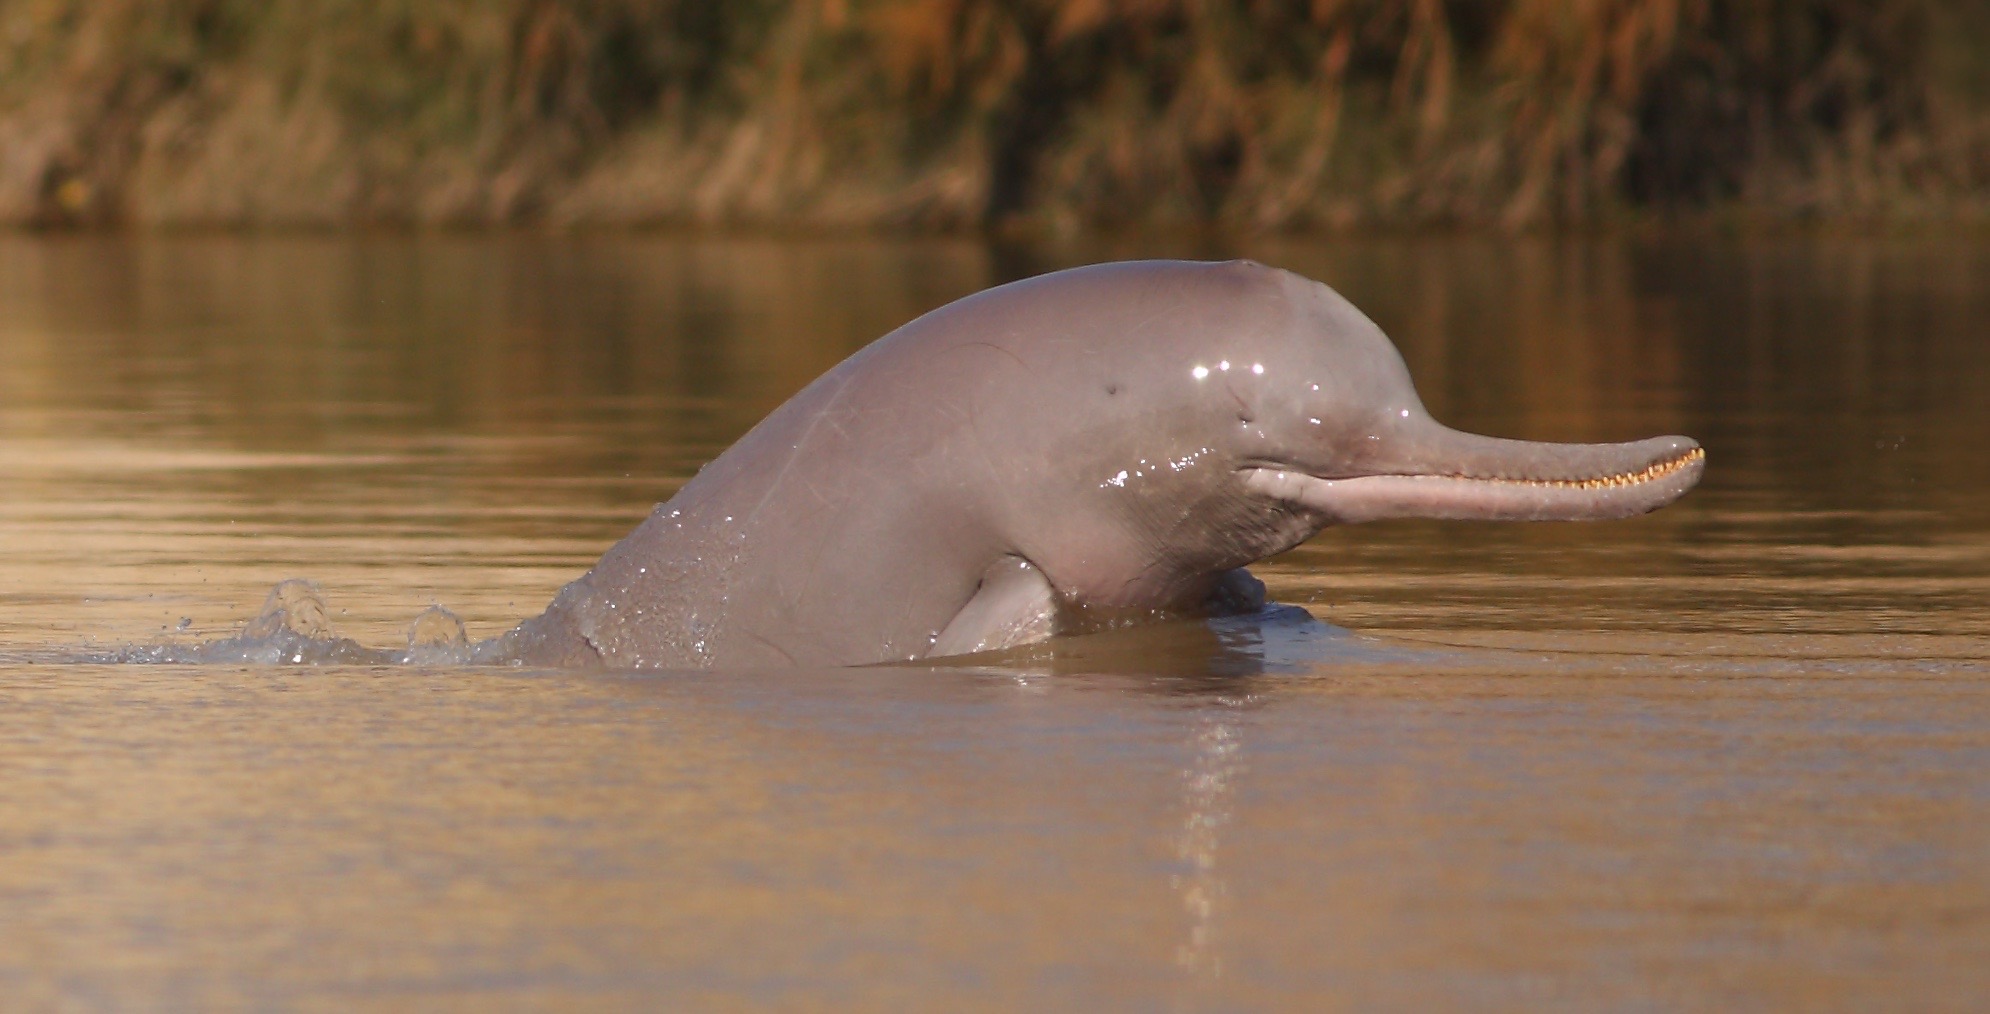 Is the Indus river dolphin an endangered species?